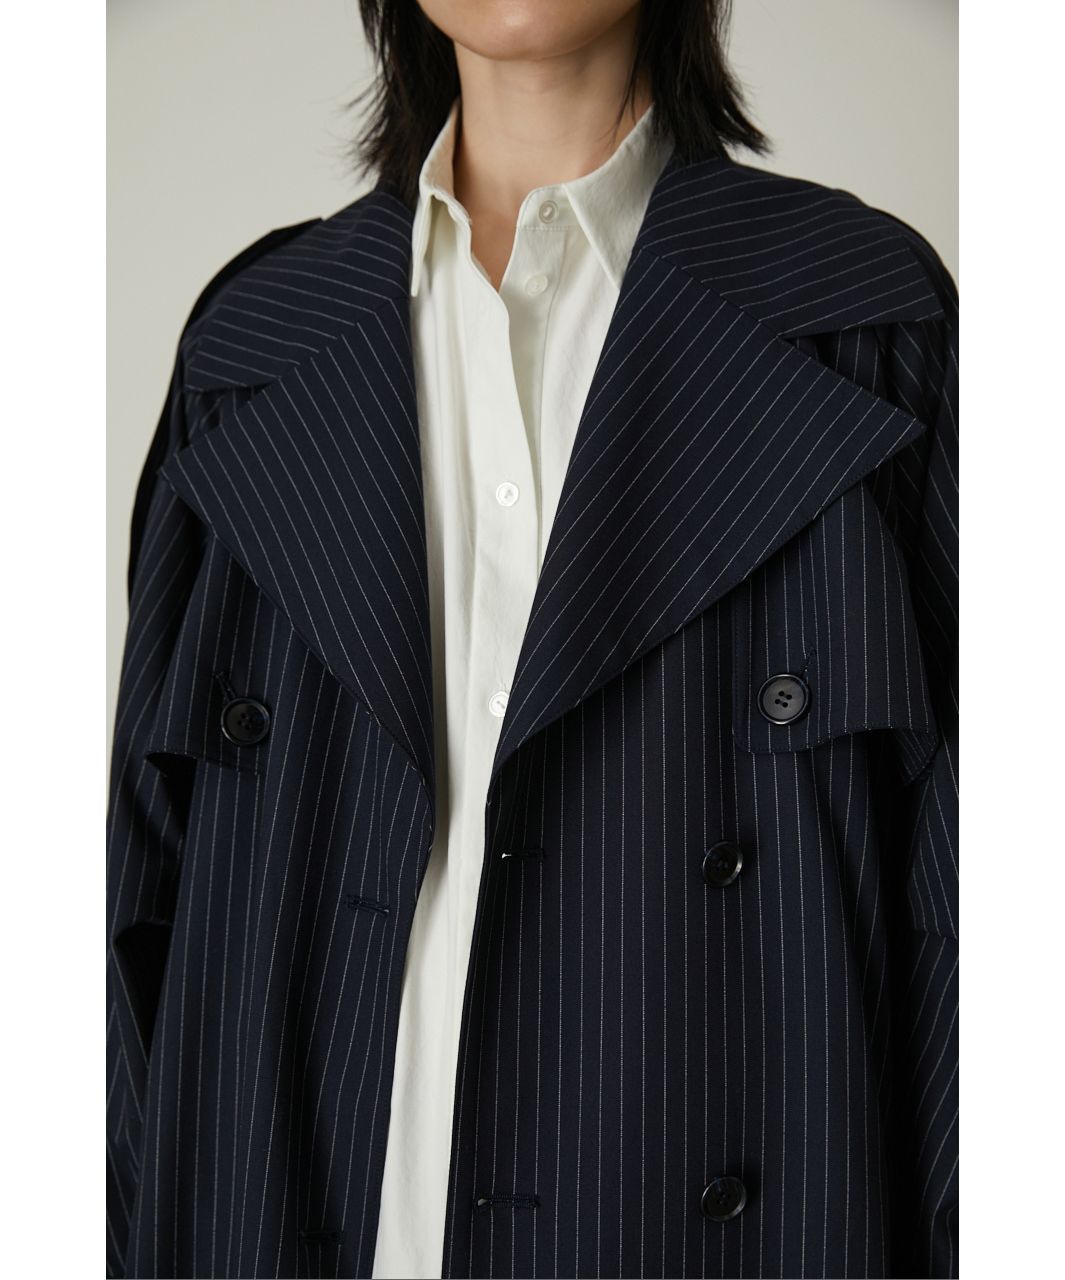 rimark Over sized trench CT コート アウター 38-